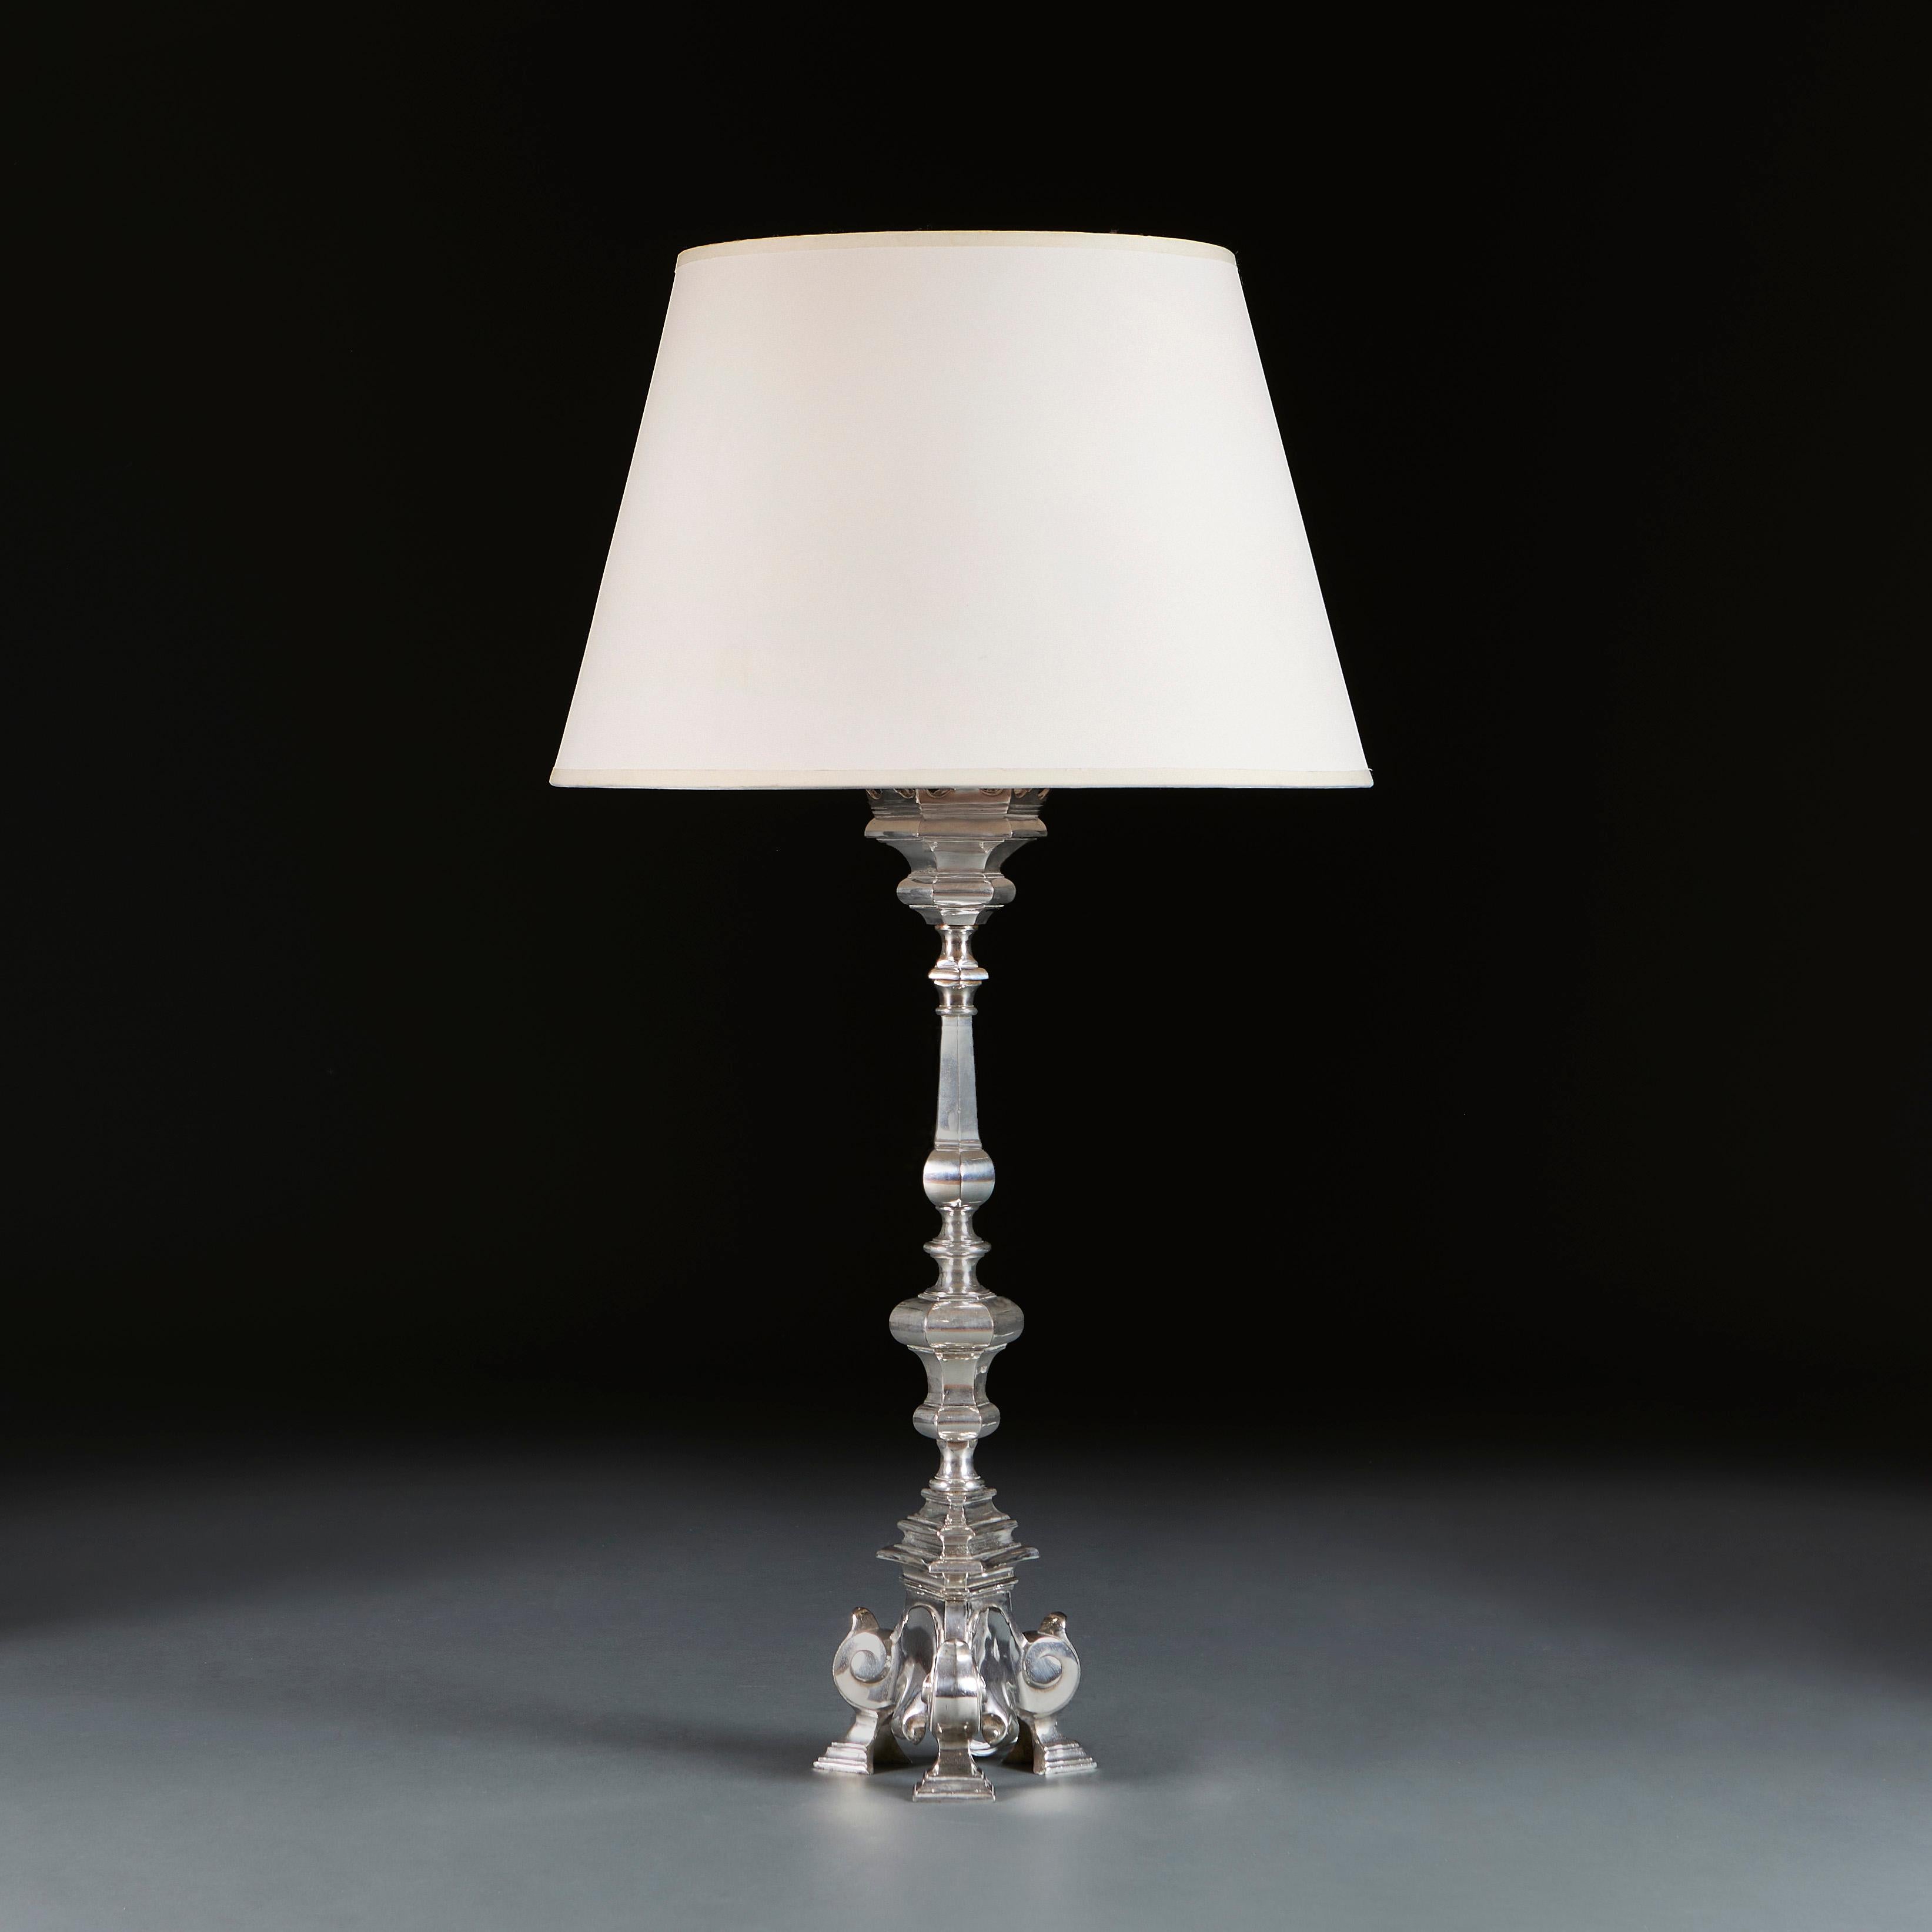 France, circa 1890

A late nineteenth century French silver column lamp of large scale, with coronet rim, baluster stem and supported on a tripod base.

Height 56.00cm
Height with shade 81.00cm
Width of base 16.00cm.

Please note: This is currently